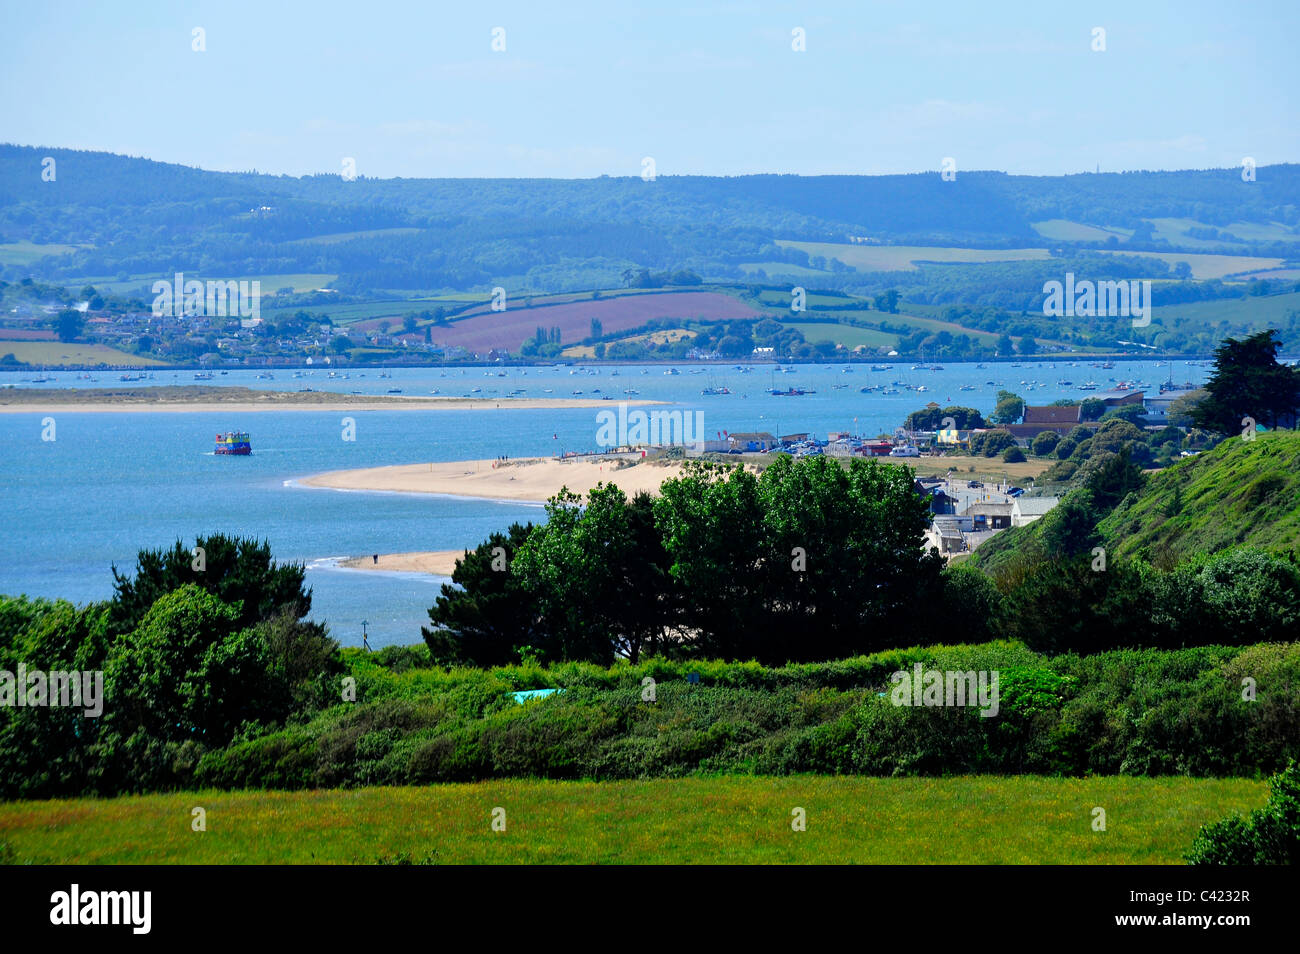 A view of Exmouth beach from the Jurrasic coast cliffs - River Exe - Devon - UK Stock Photo